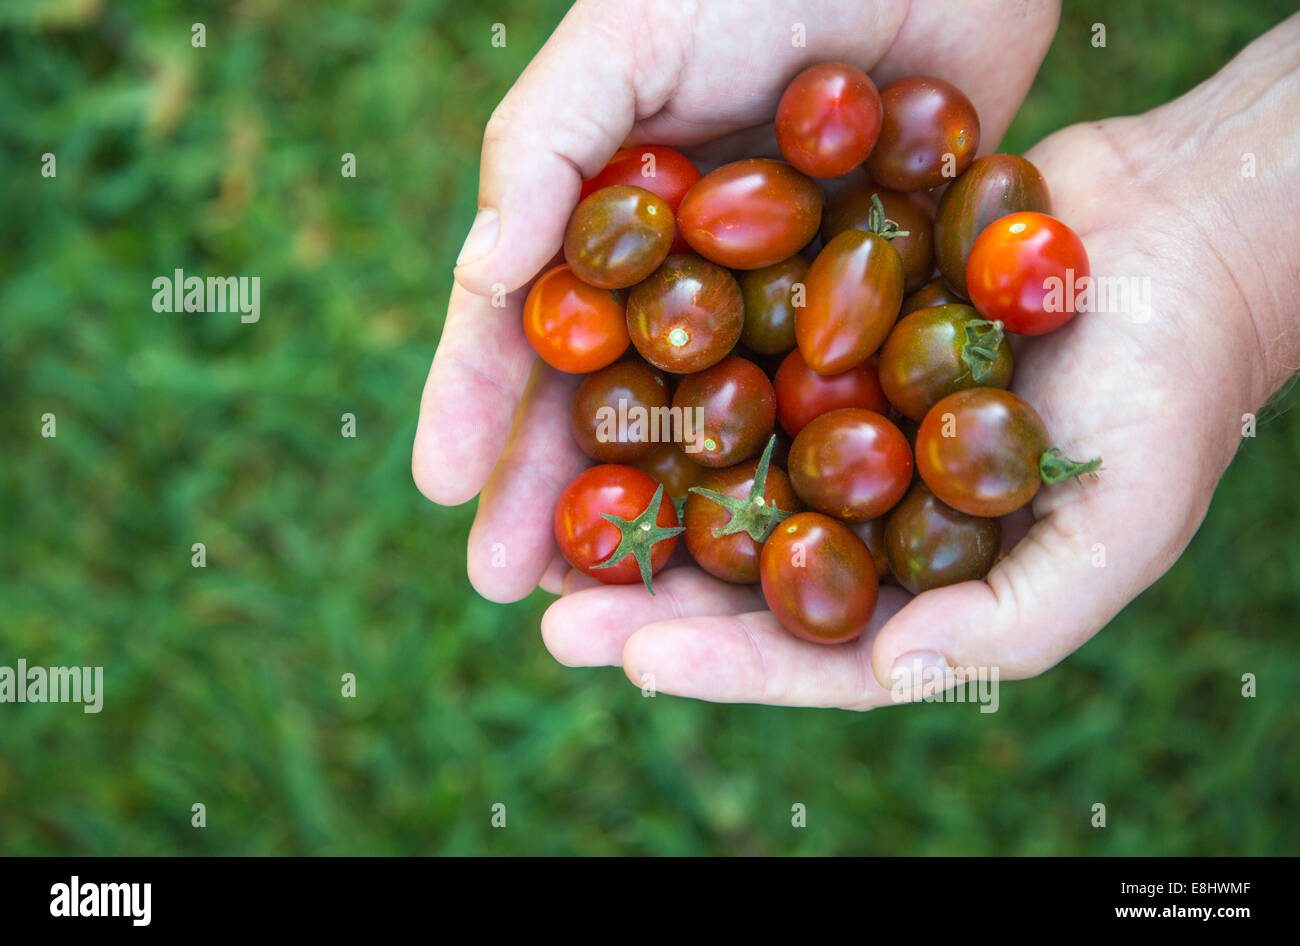 homegrown just picked cherry tomatoes, shown right side, held in the hand against grass Stock Photo